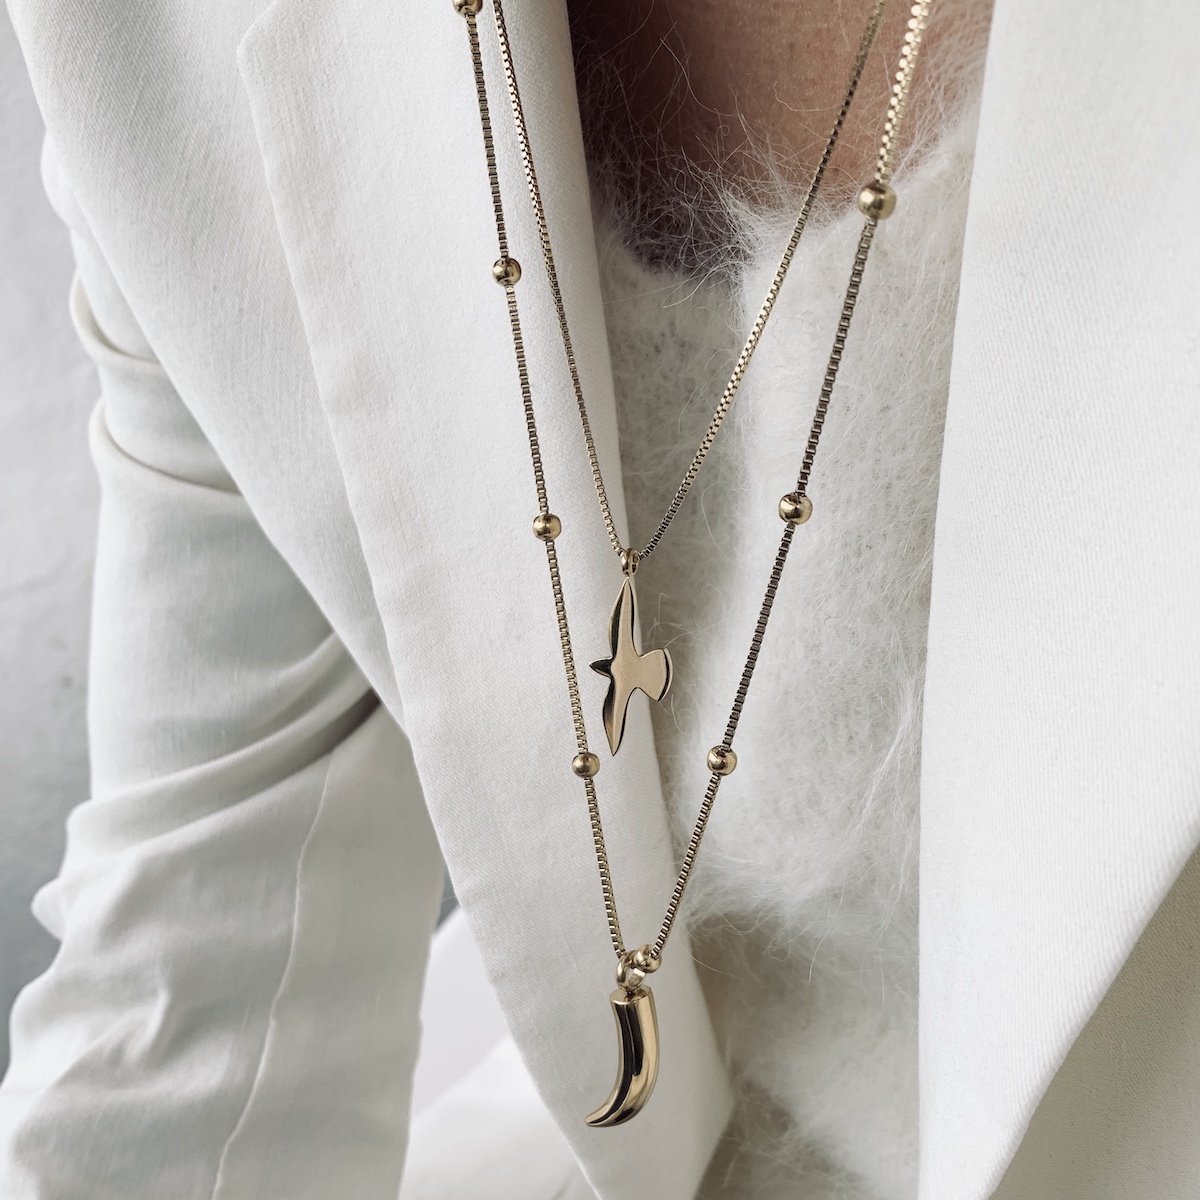 Dove Long Necklace Guld